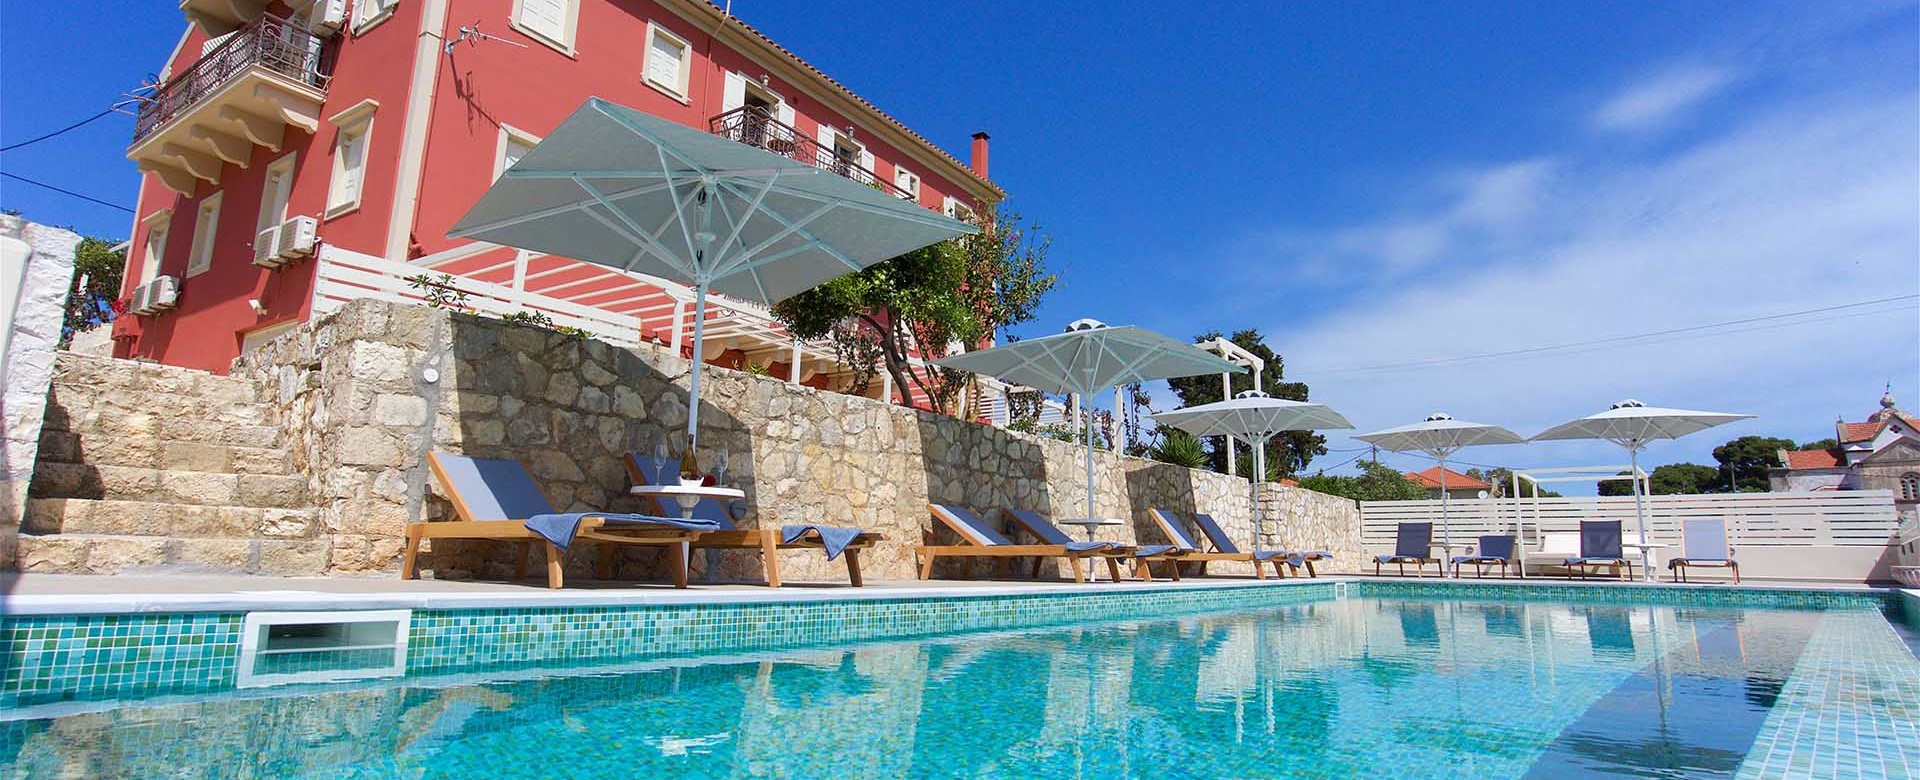 Relax in the pool and take in the sky during your holiday to Magnolia Apartments, Fiscardo, Kefalonia, Greek Islands